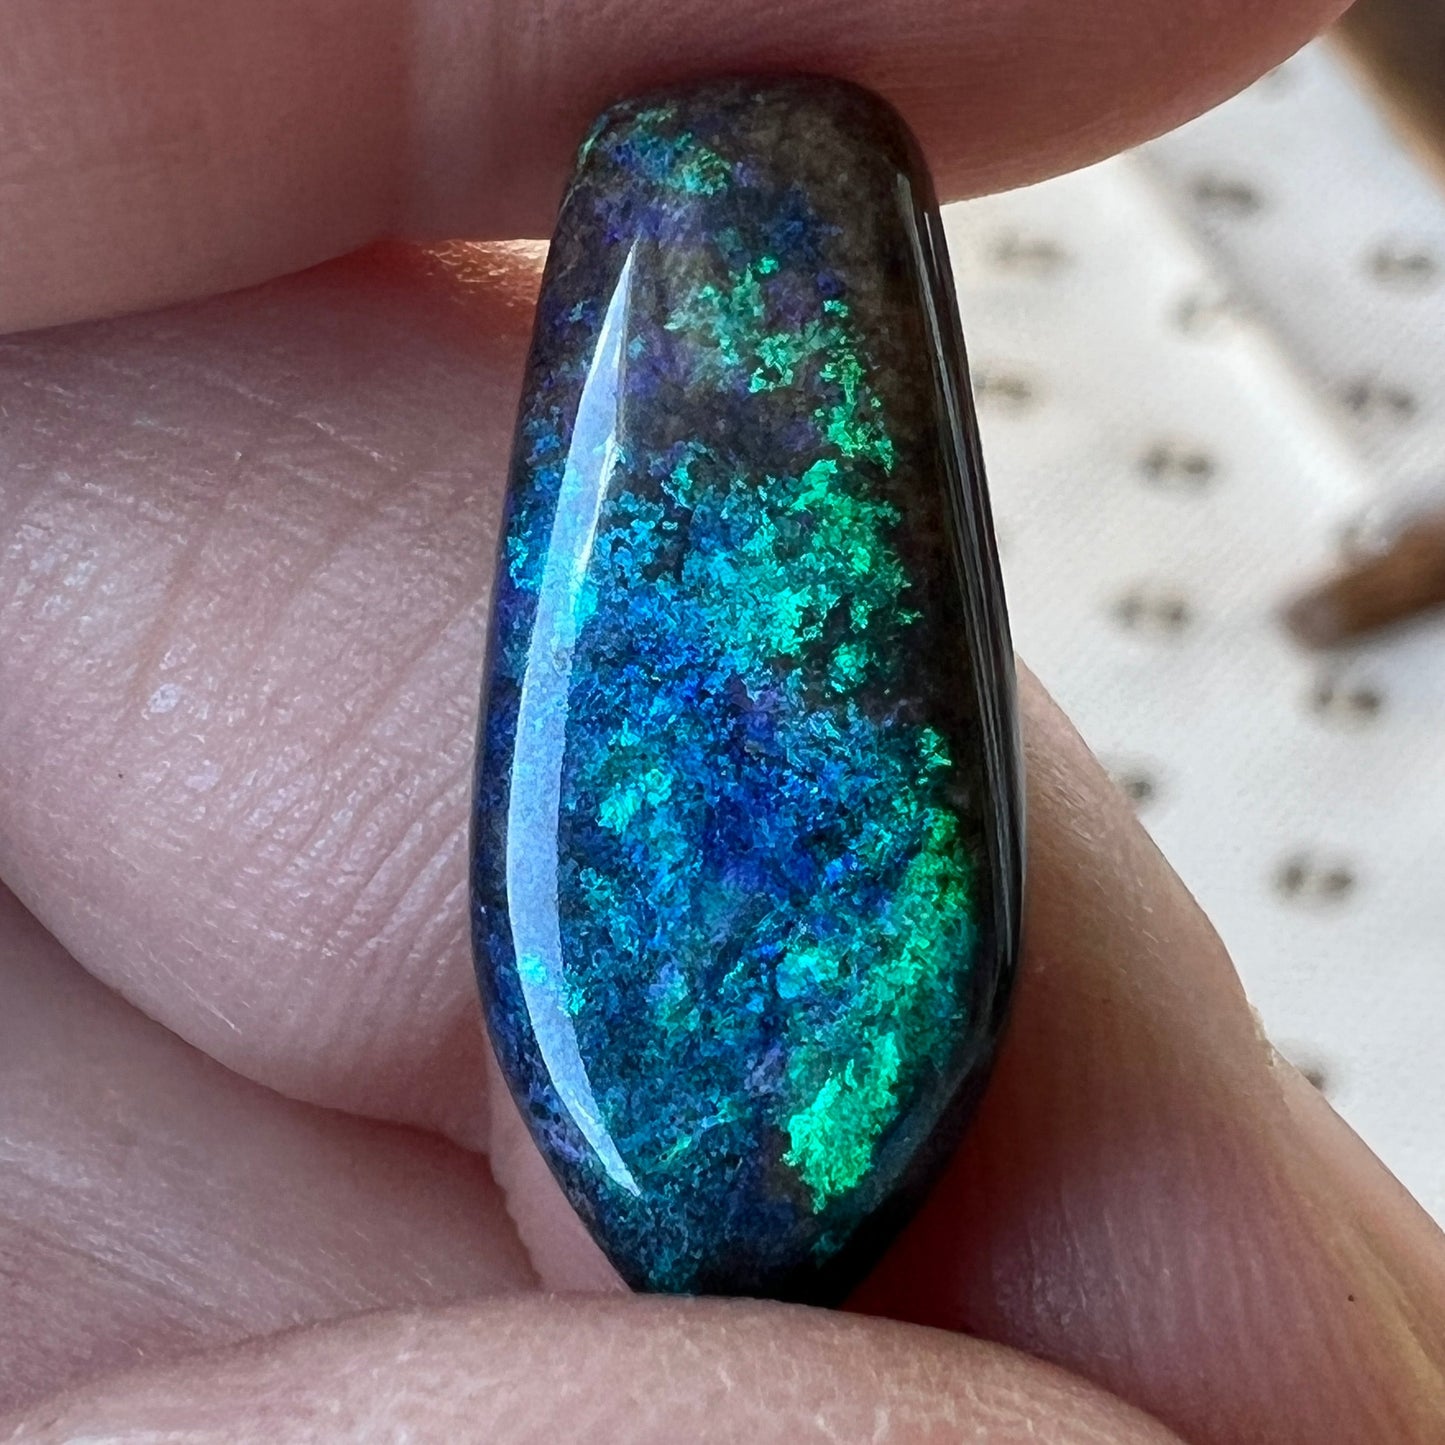 Winton boulder opal displaying beautiful blues and greens. Would make an awesome pendant or a large ring.